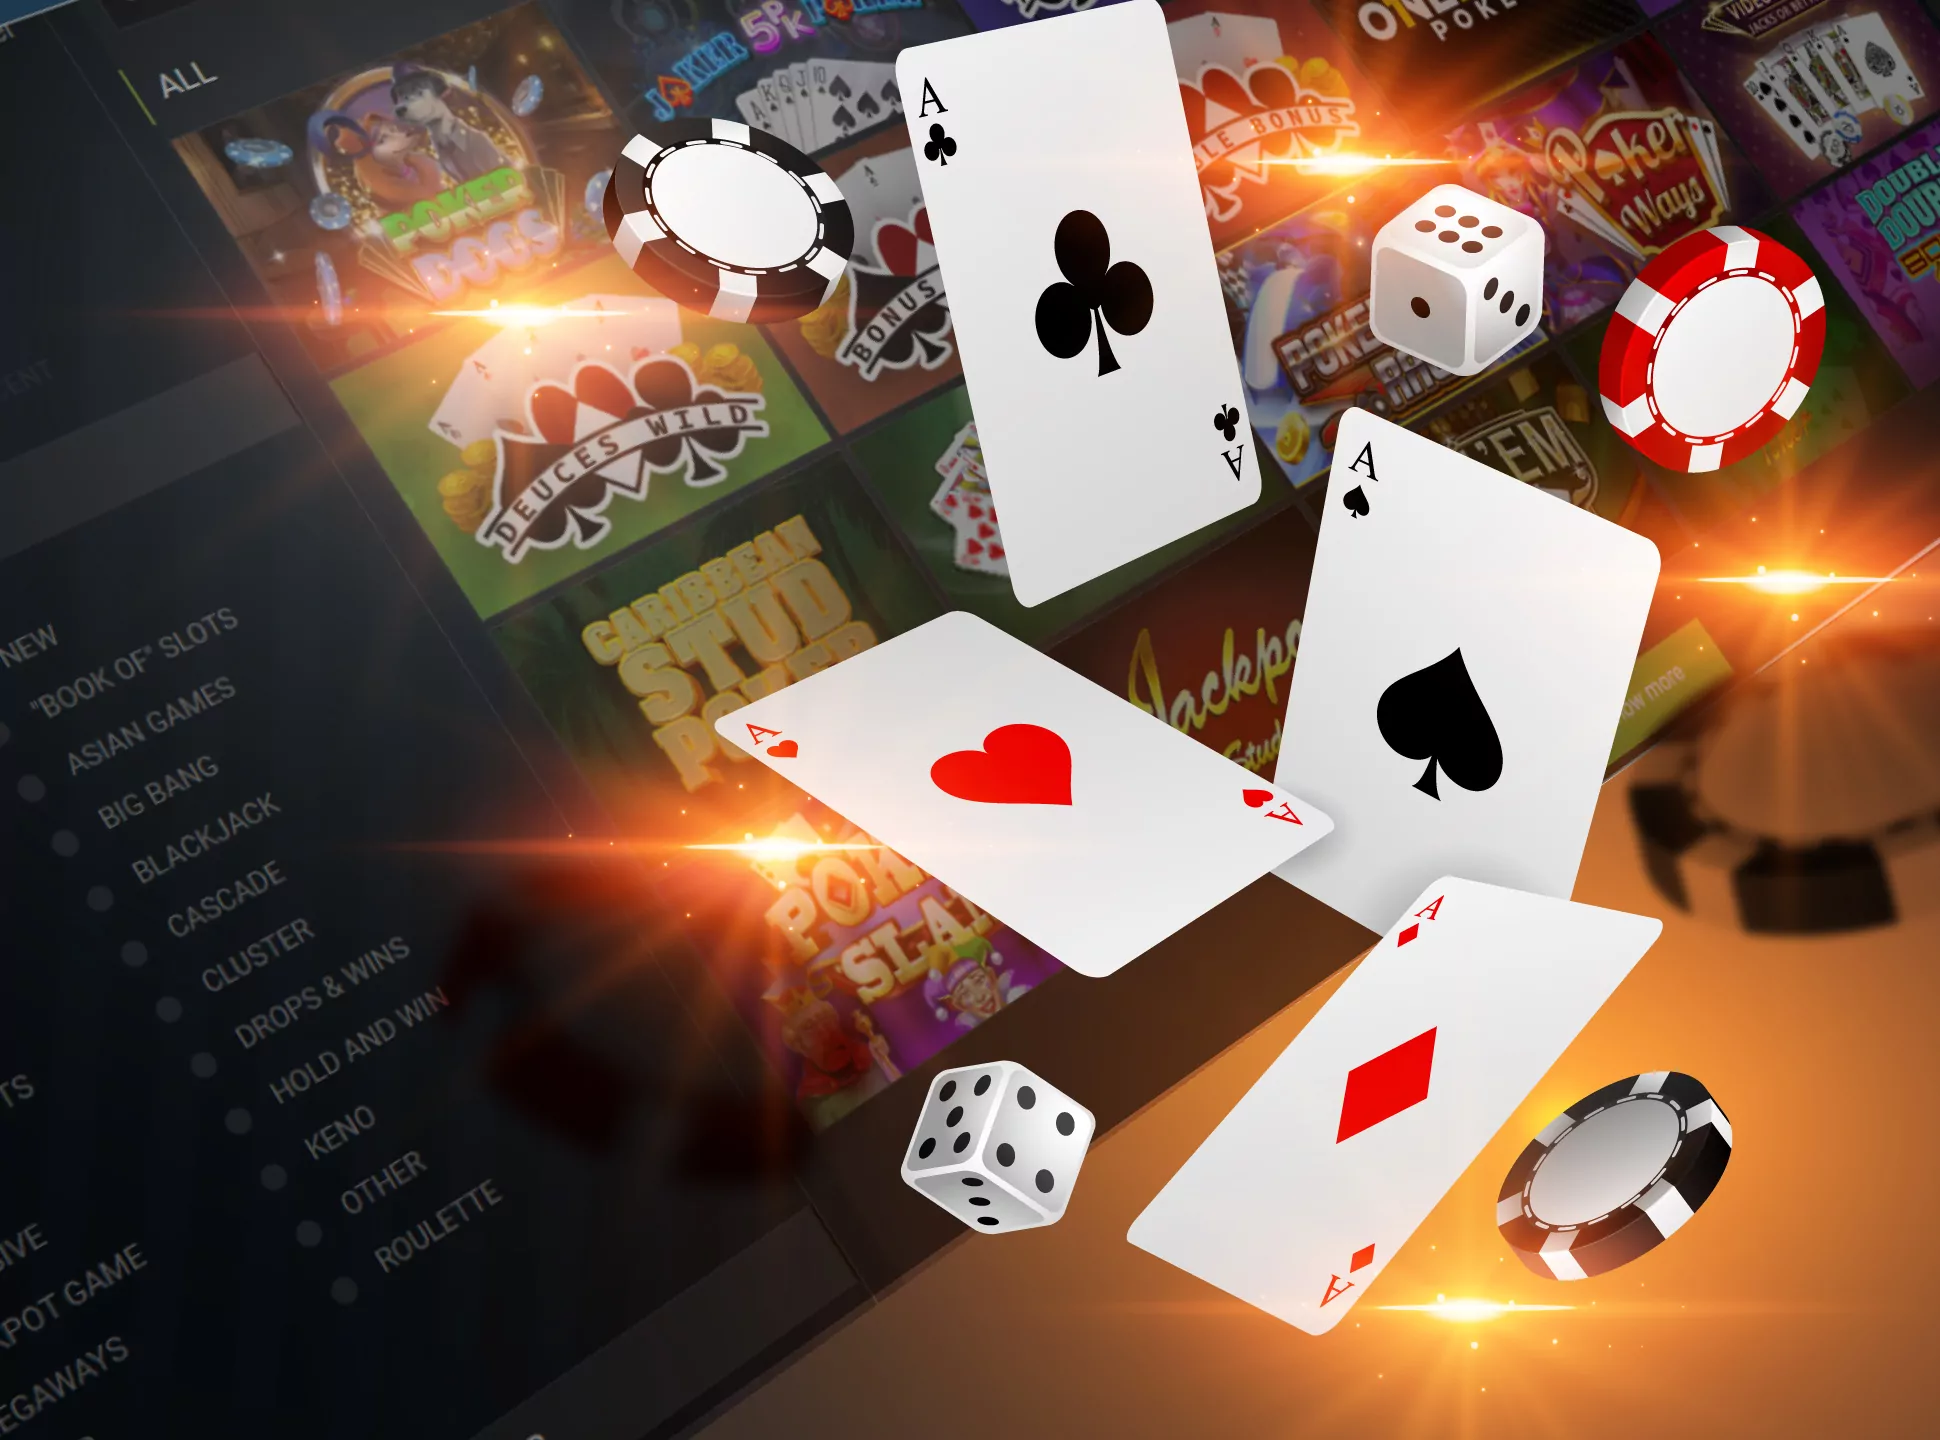 Play poker games and try to win at online casino.